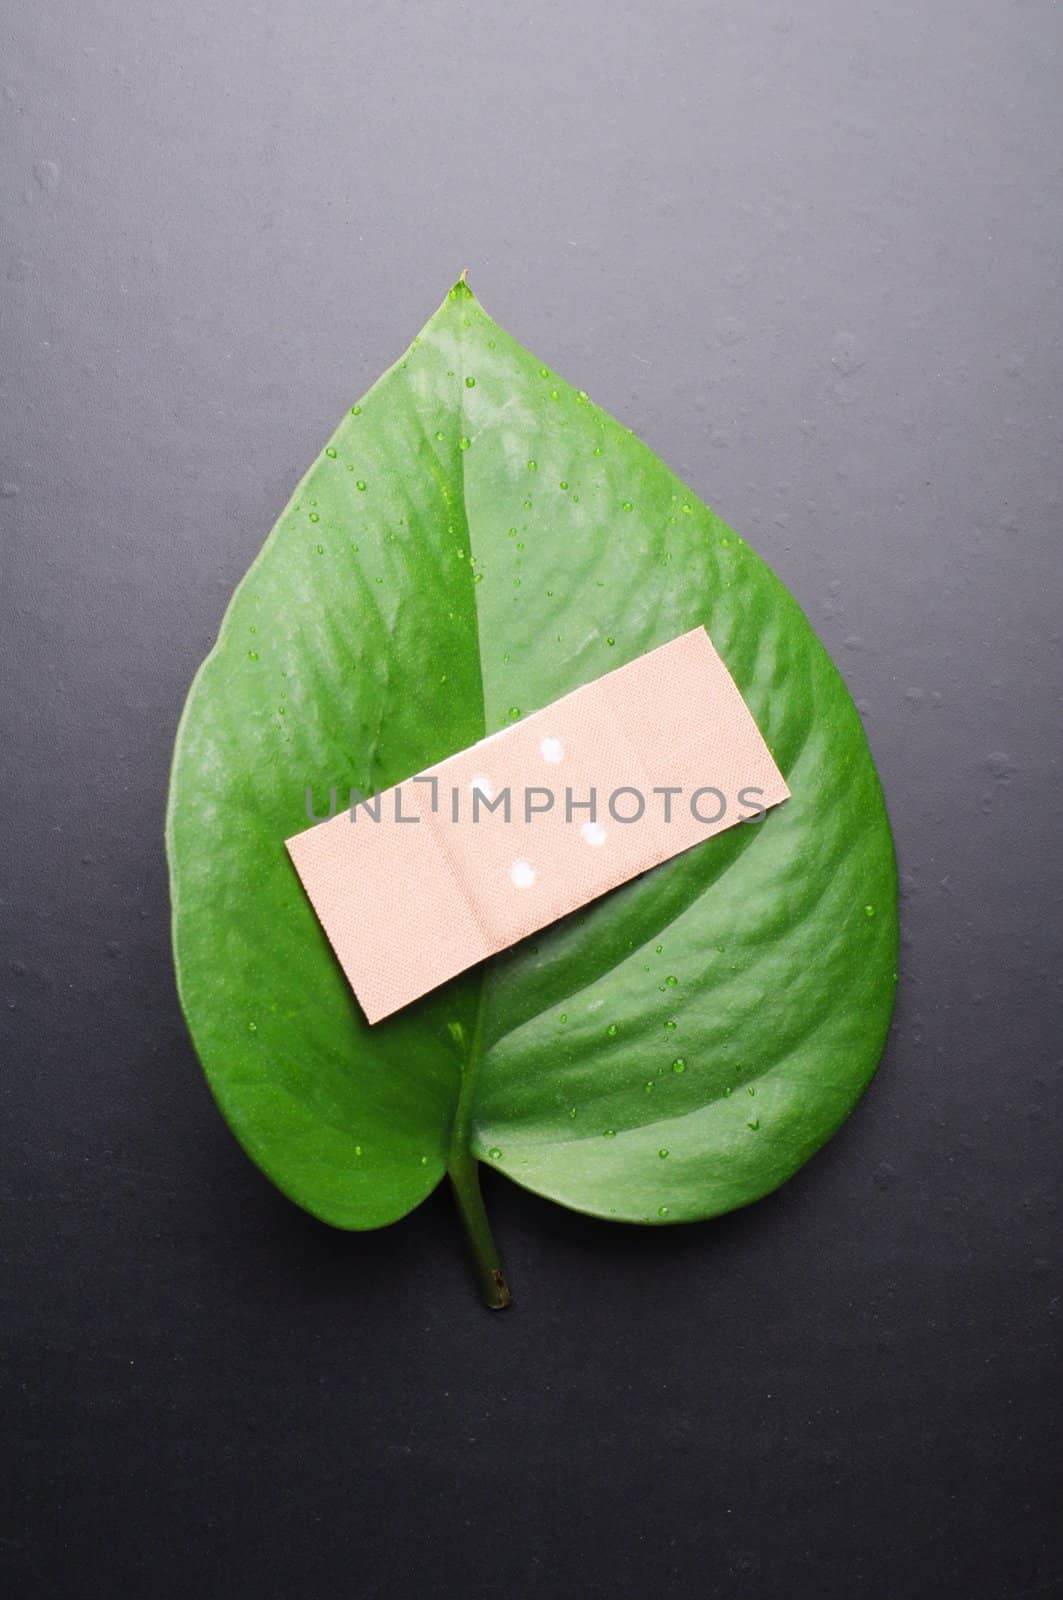 eco ecology or nature protection concept with leaf and band aid on black